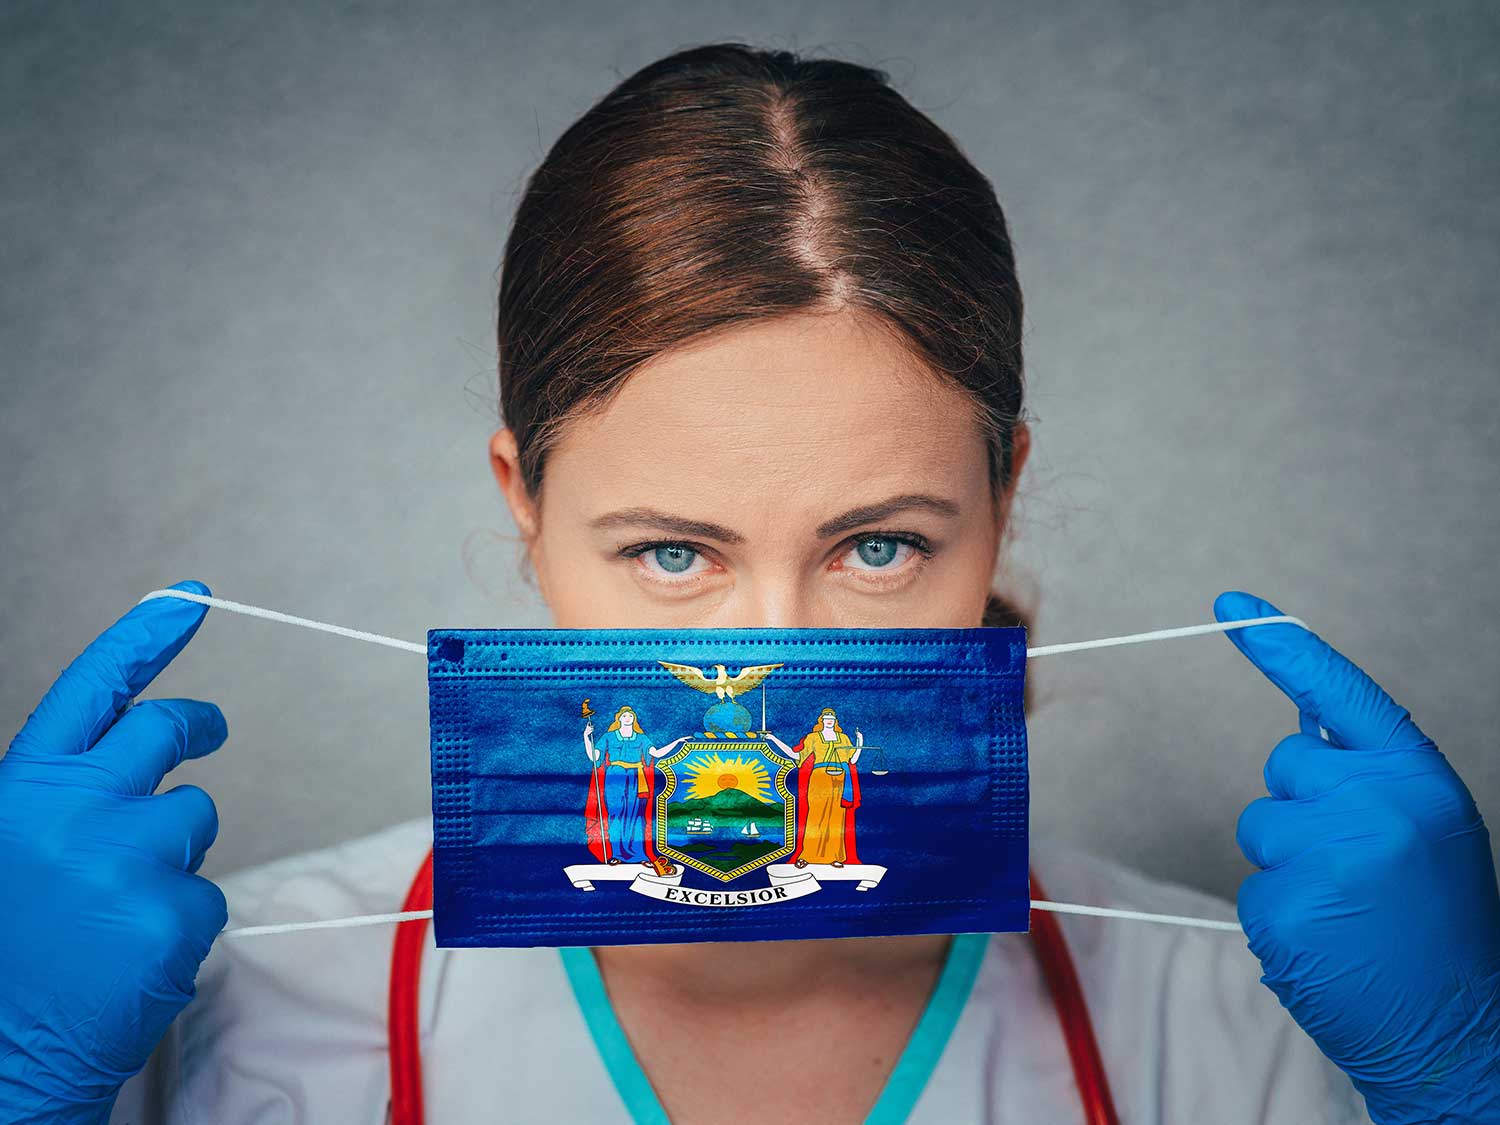 A Female Doctor With Medical Malpractice Insurance Putting On A Surgical Mask Printed With The New York State Flag